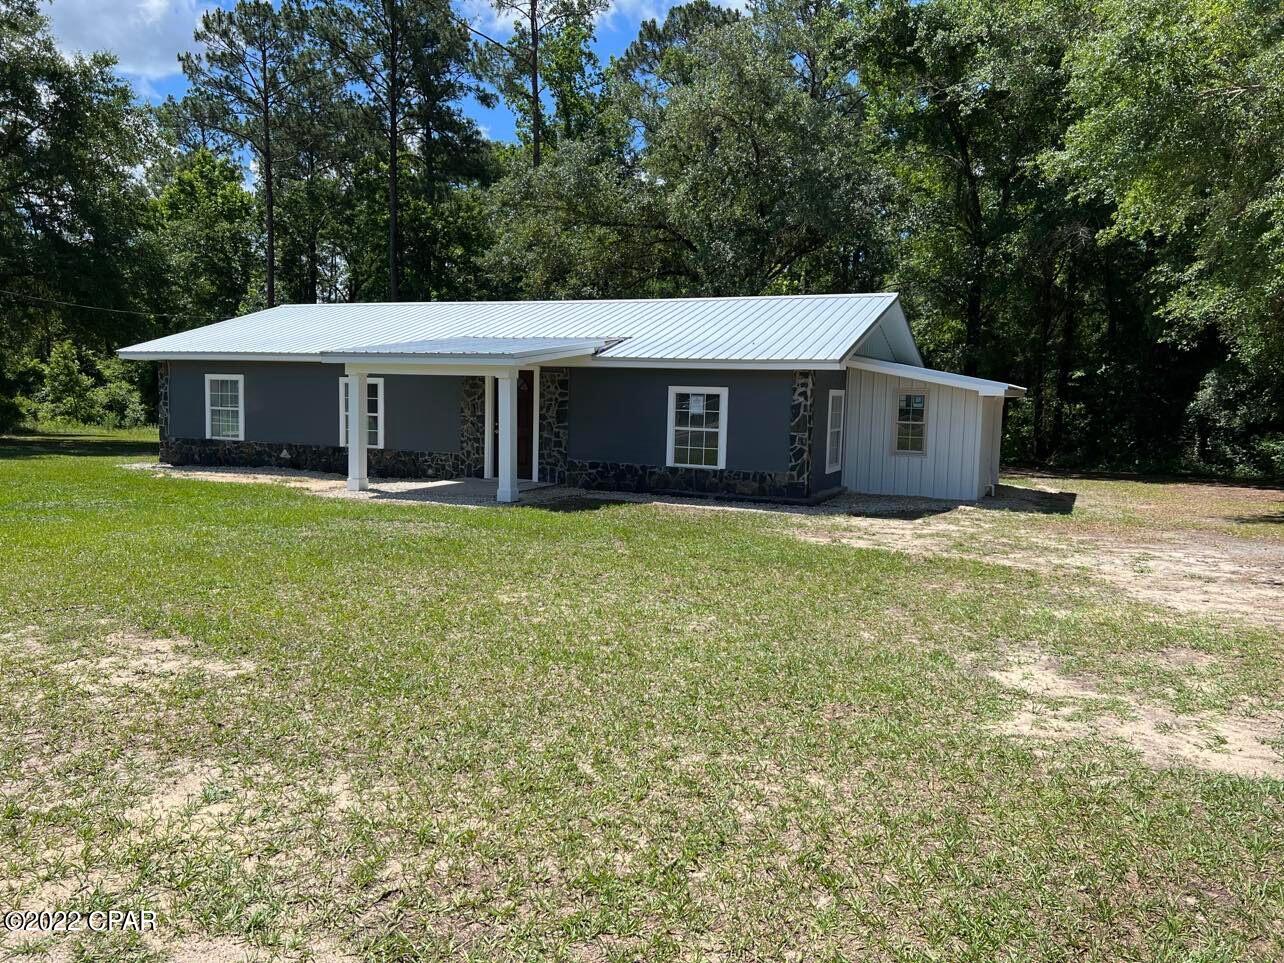 Freshly renovated, 3BR/1.5BA situated in the peaceful town of Hosford (Telogia). 1.65 acres. Top to bottom, this home has been updated with stainless steel appliances, new flooring, fresh paint, a separated laundry room, and large back deck, and much more!  This home will qualify for any type of financing. This place is sure to make a wonderful forever home!